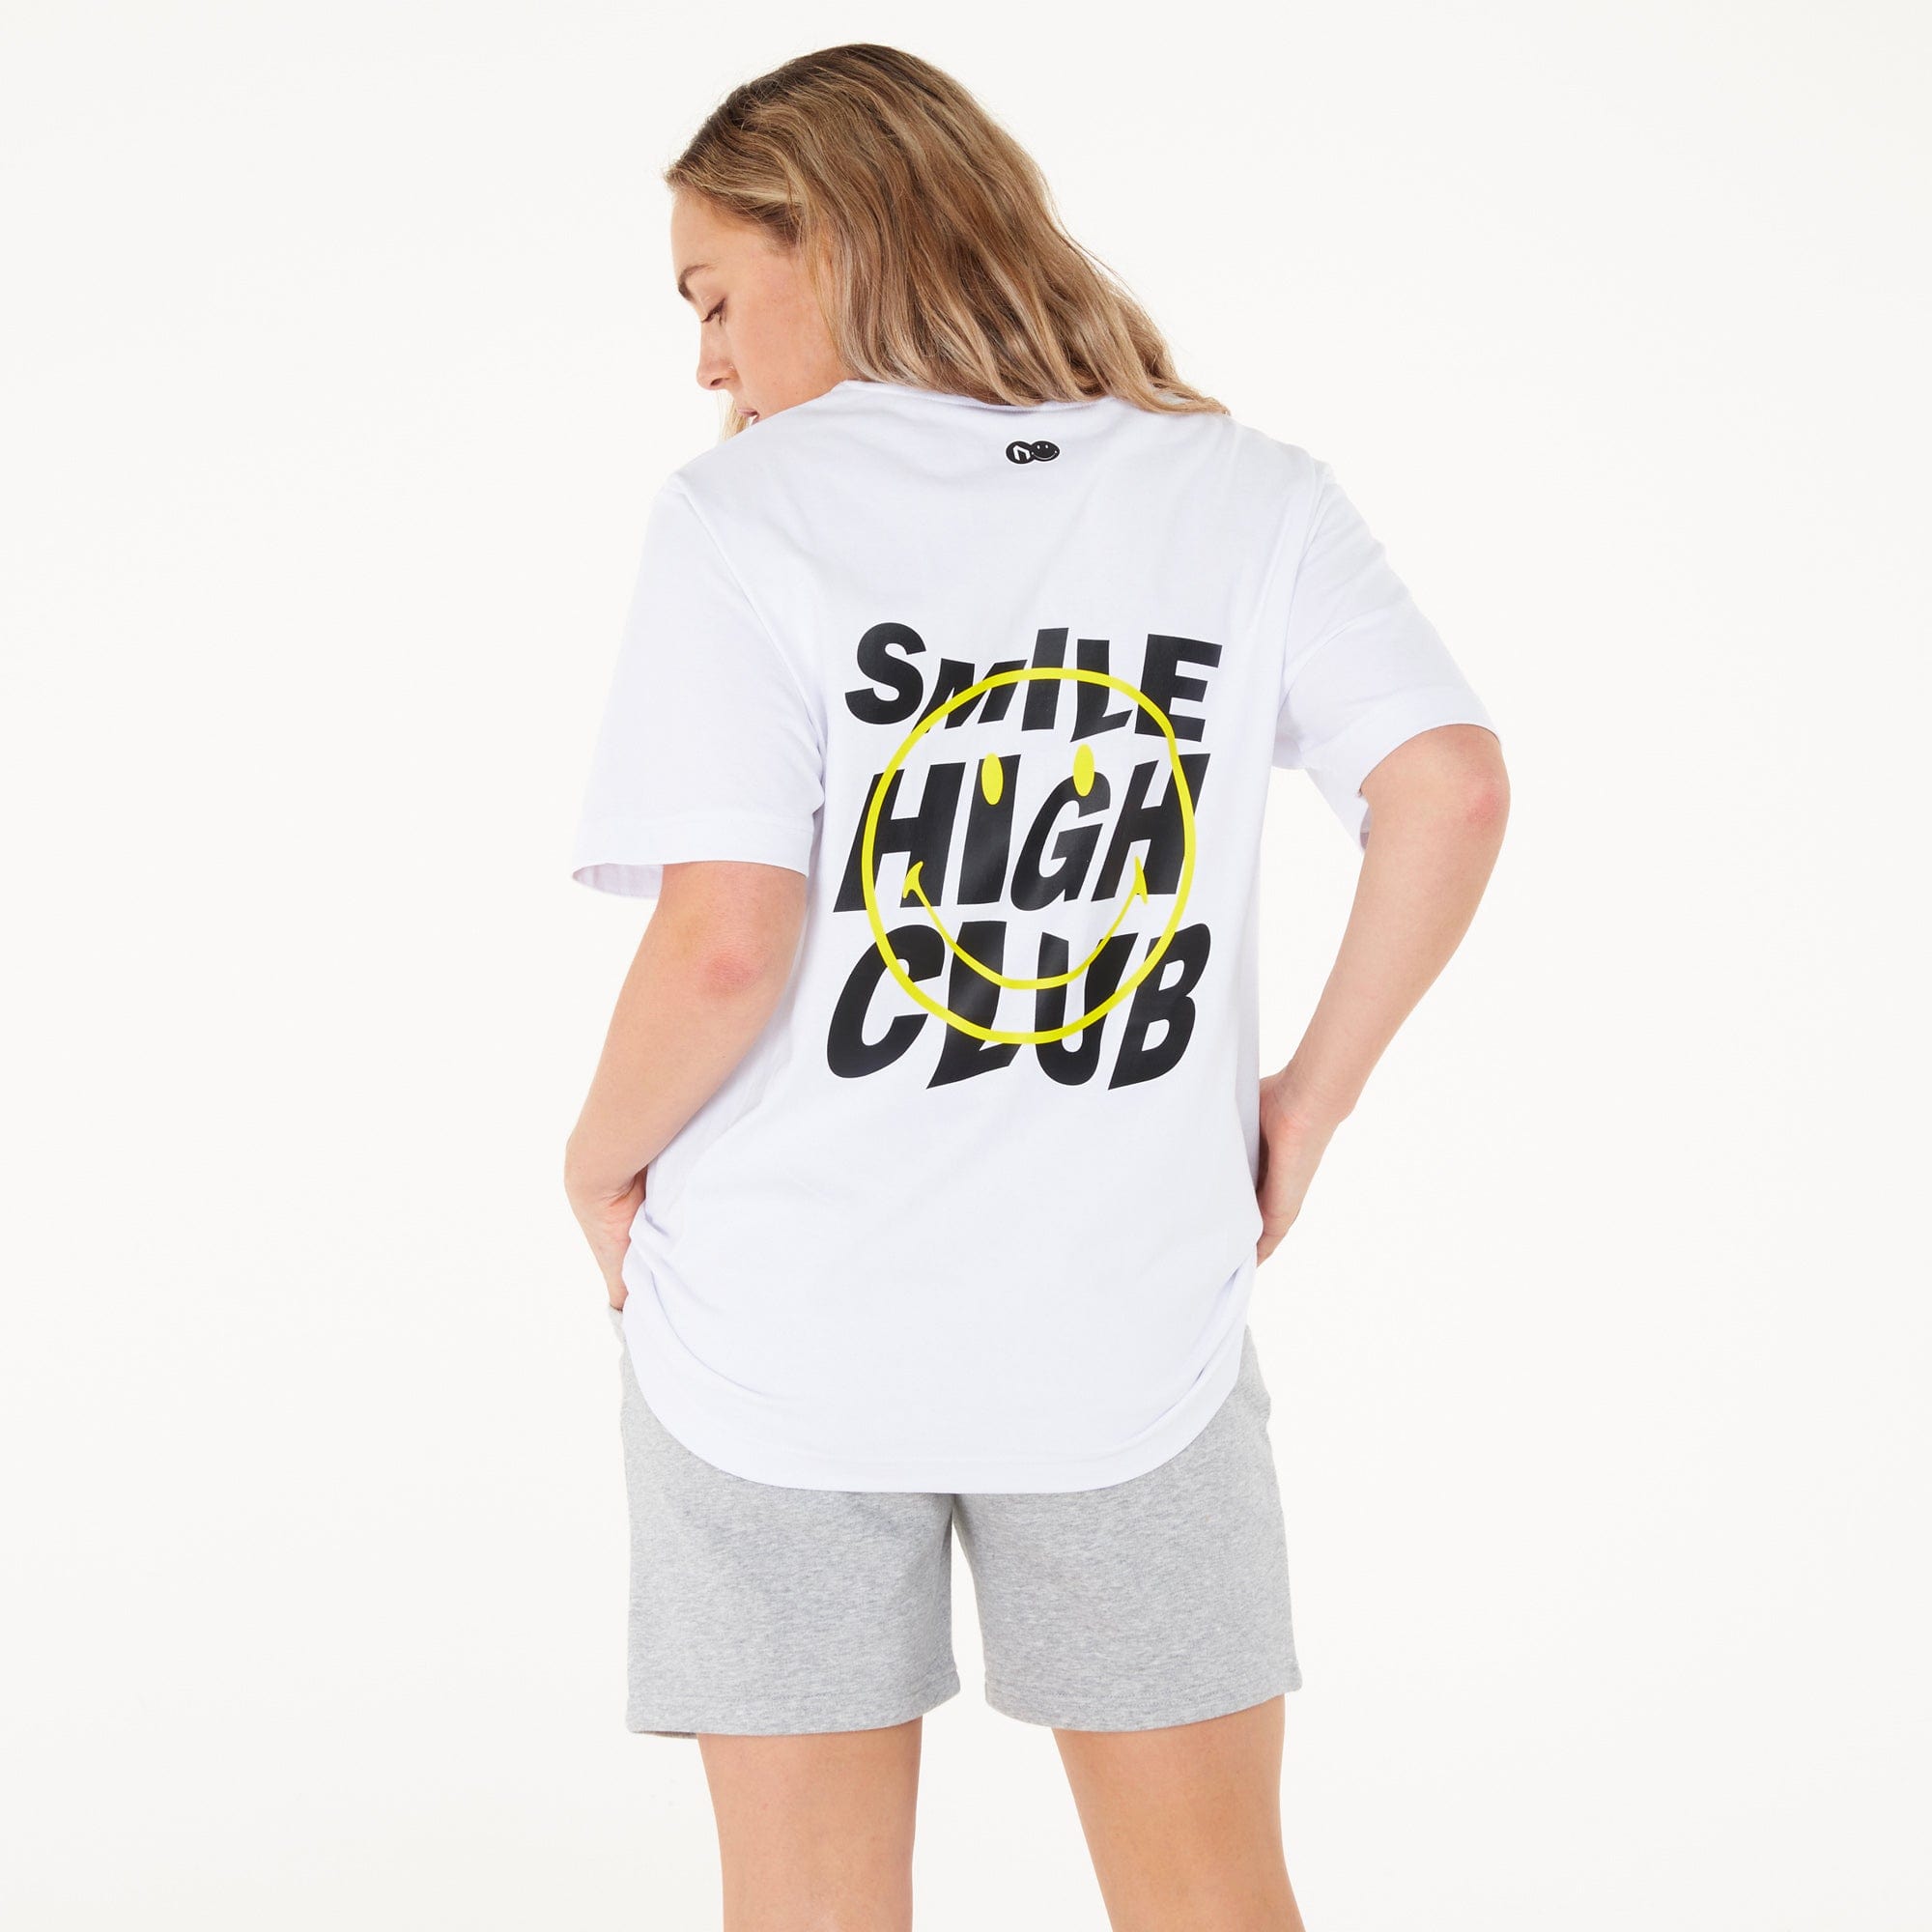 WIT Fitness T-shirts WIT & Smiley Originals Smile High Club Tee in White